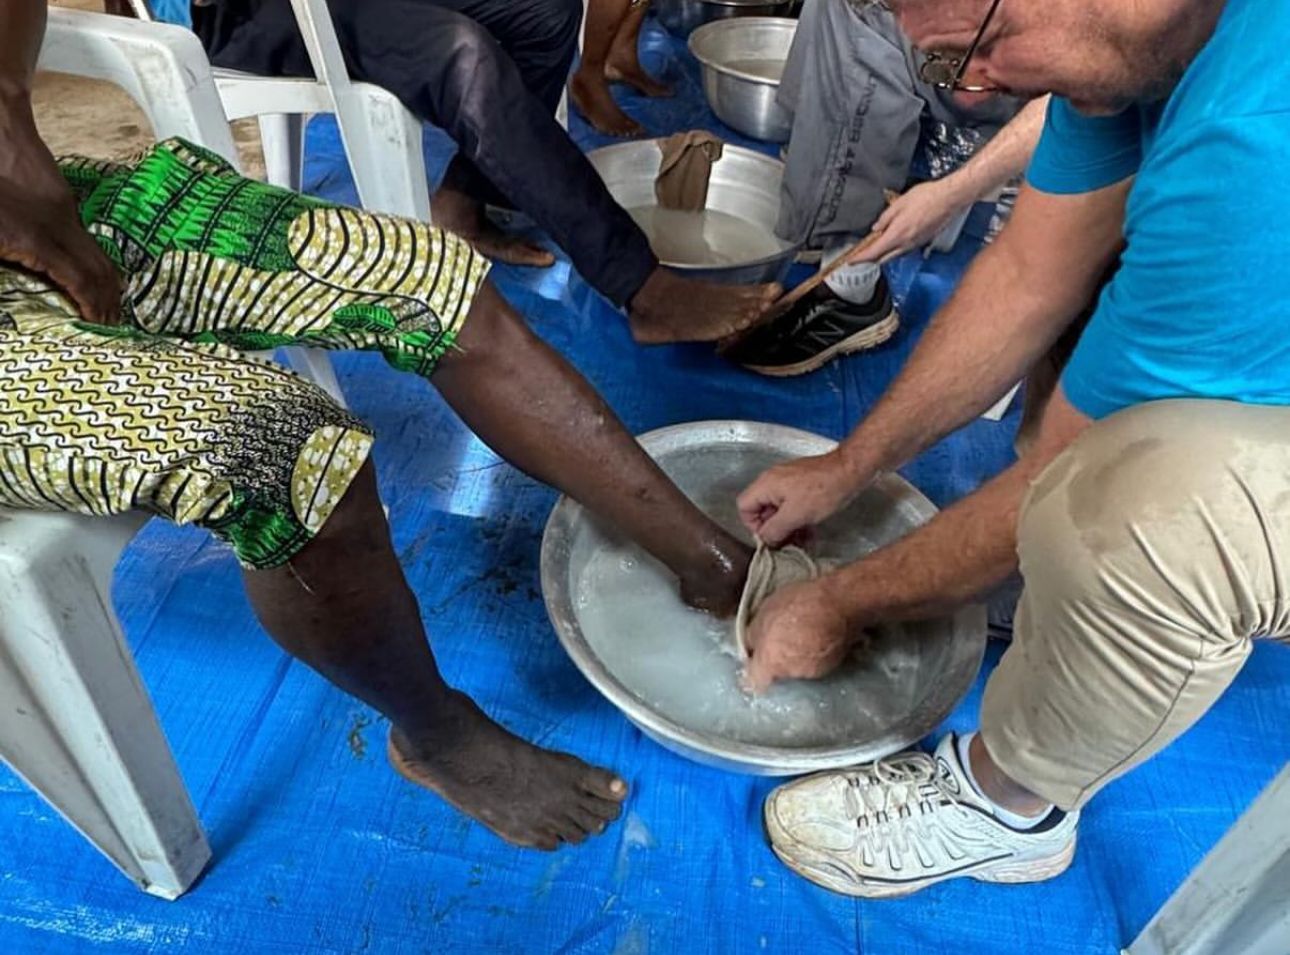 Man washes the feet of someone he is serving for a mission trip.